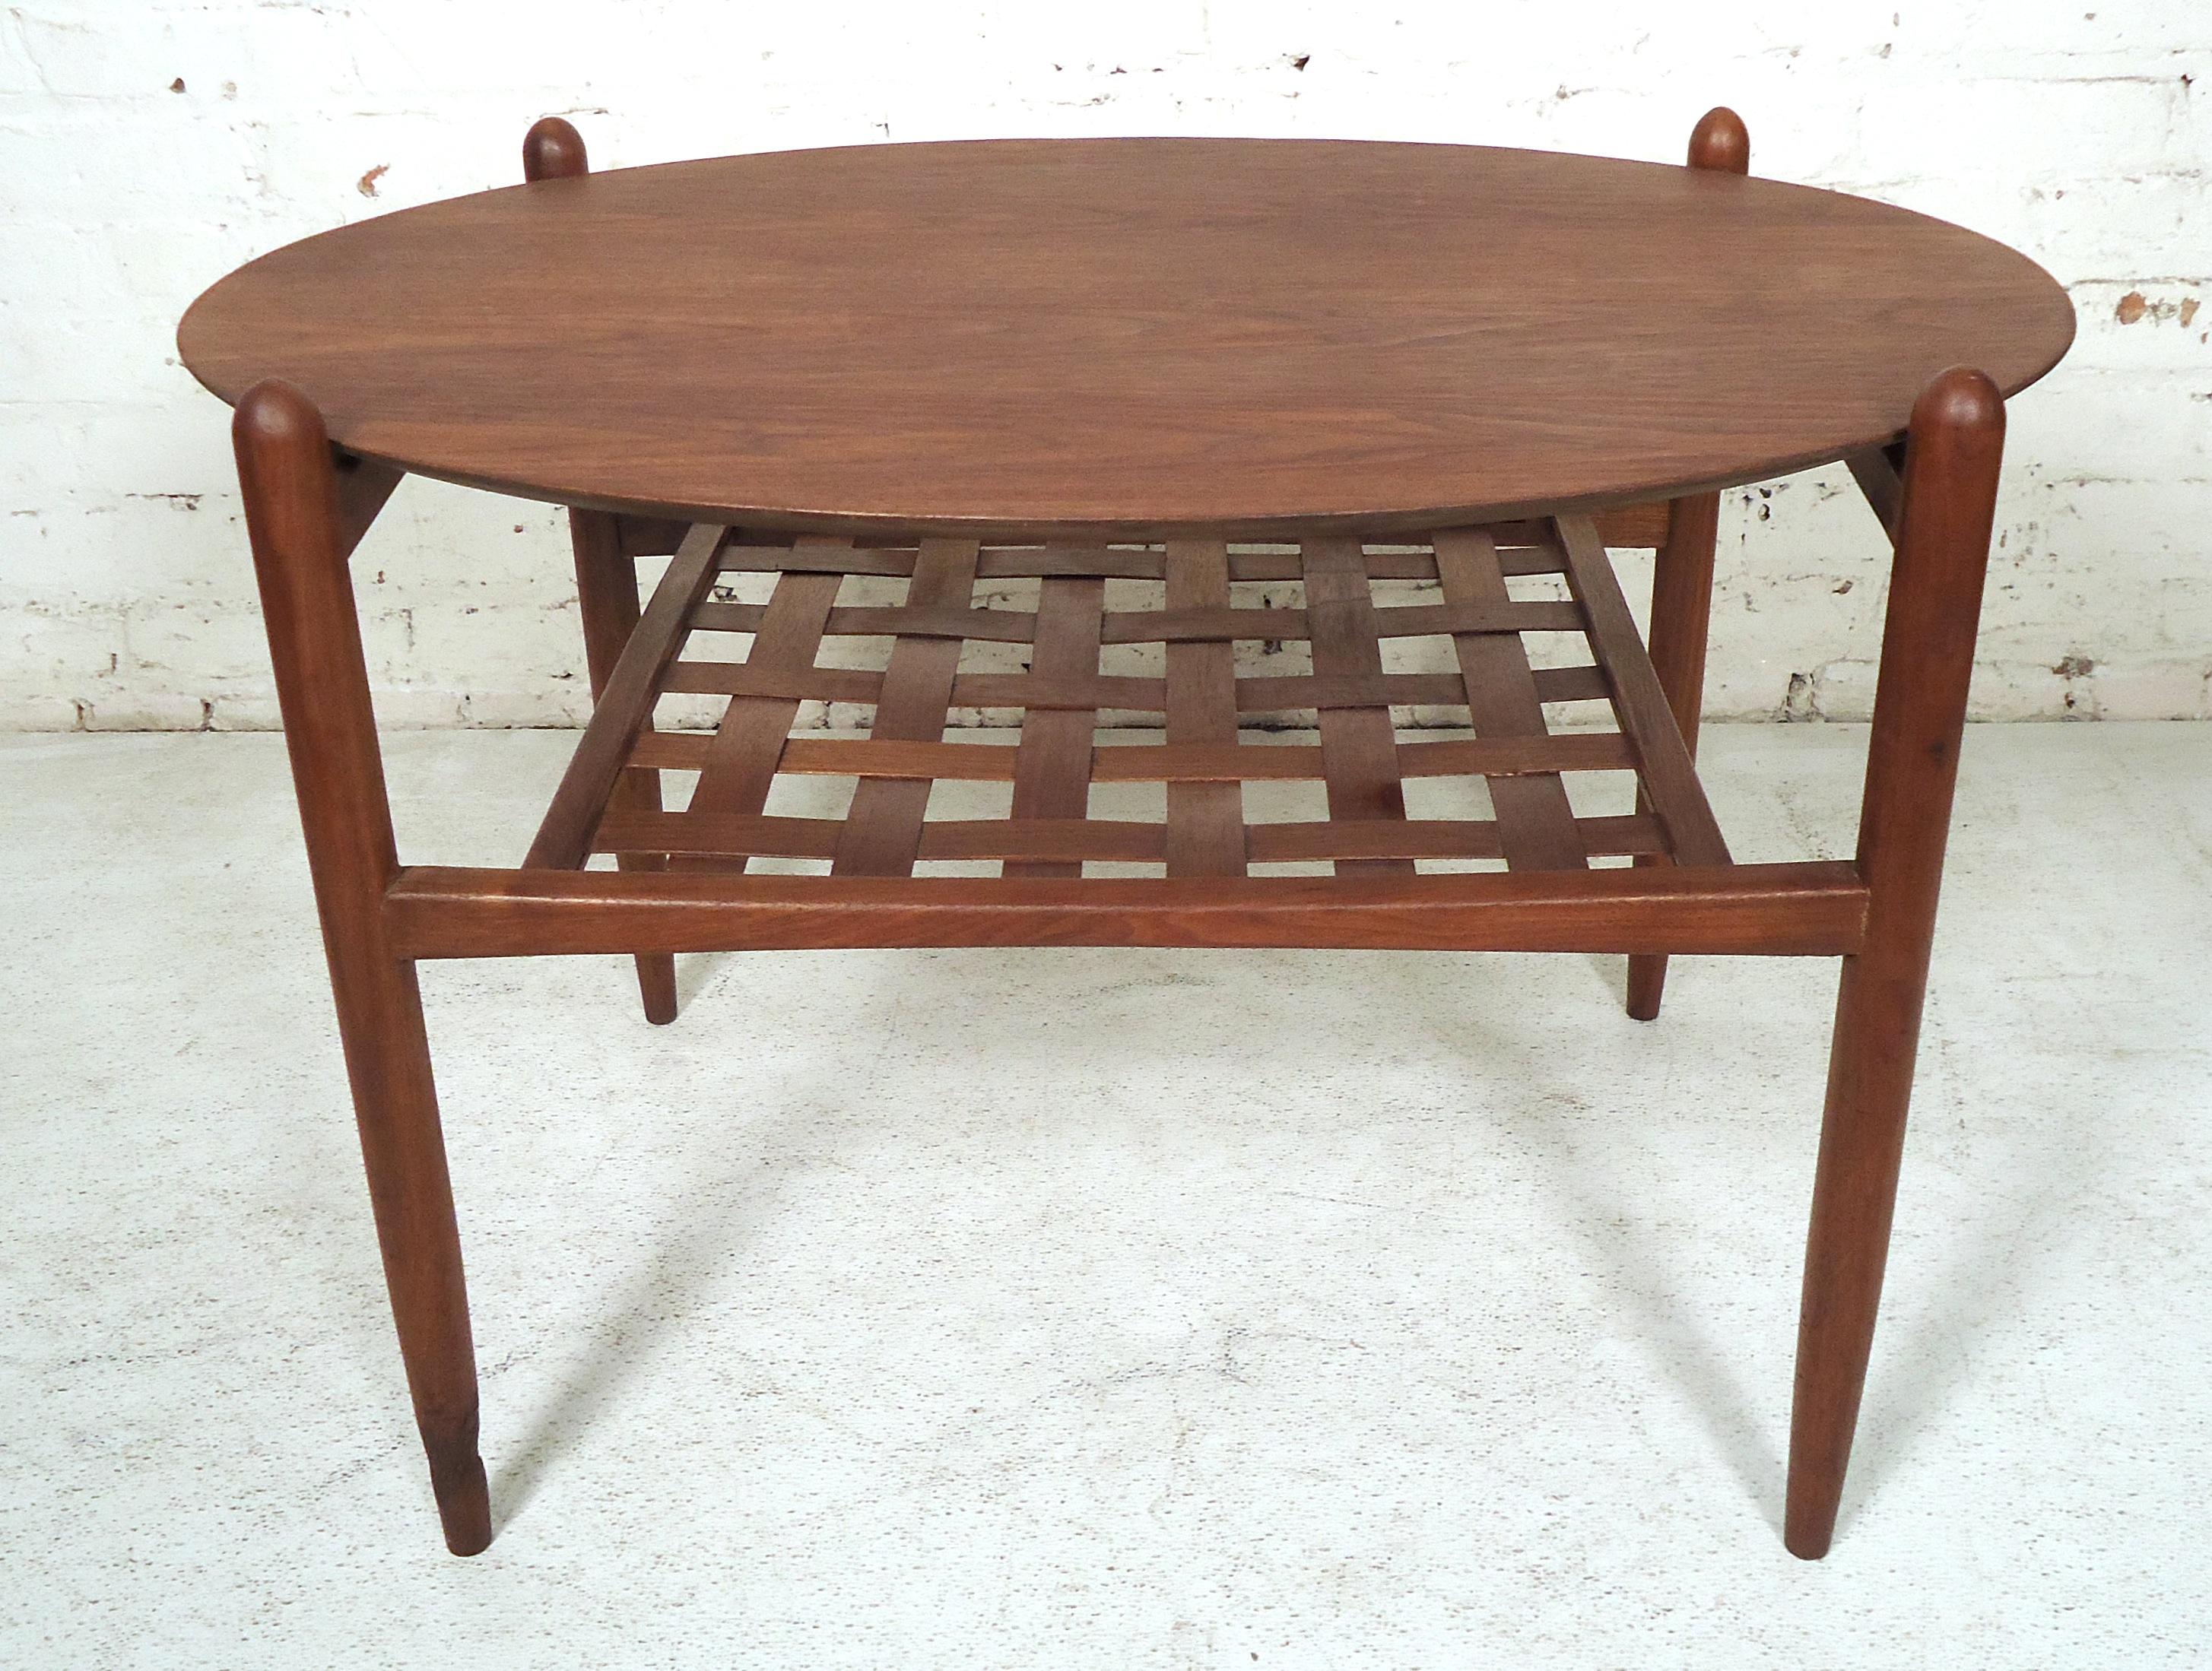 Gorgeous oval vintage modern side table featuring rich walnut grain and a basket woven second tier.

(Please confirm item location - NY or NJ - with dealer).